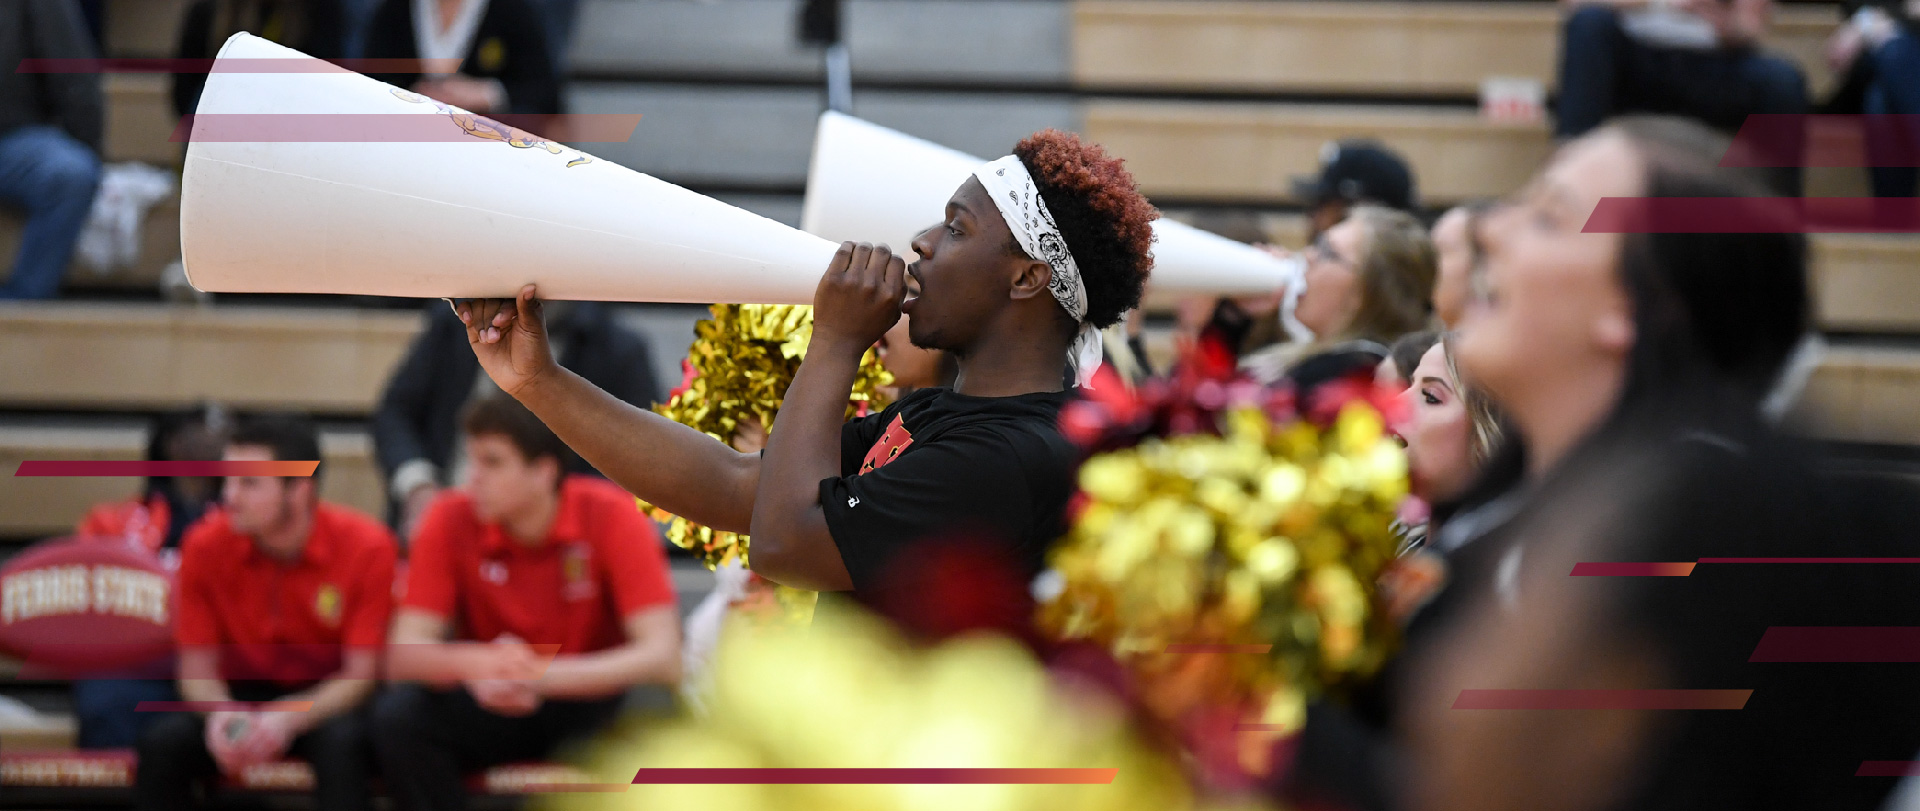 Student cheering on the Bulldogs at an athletics event